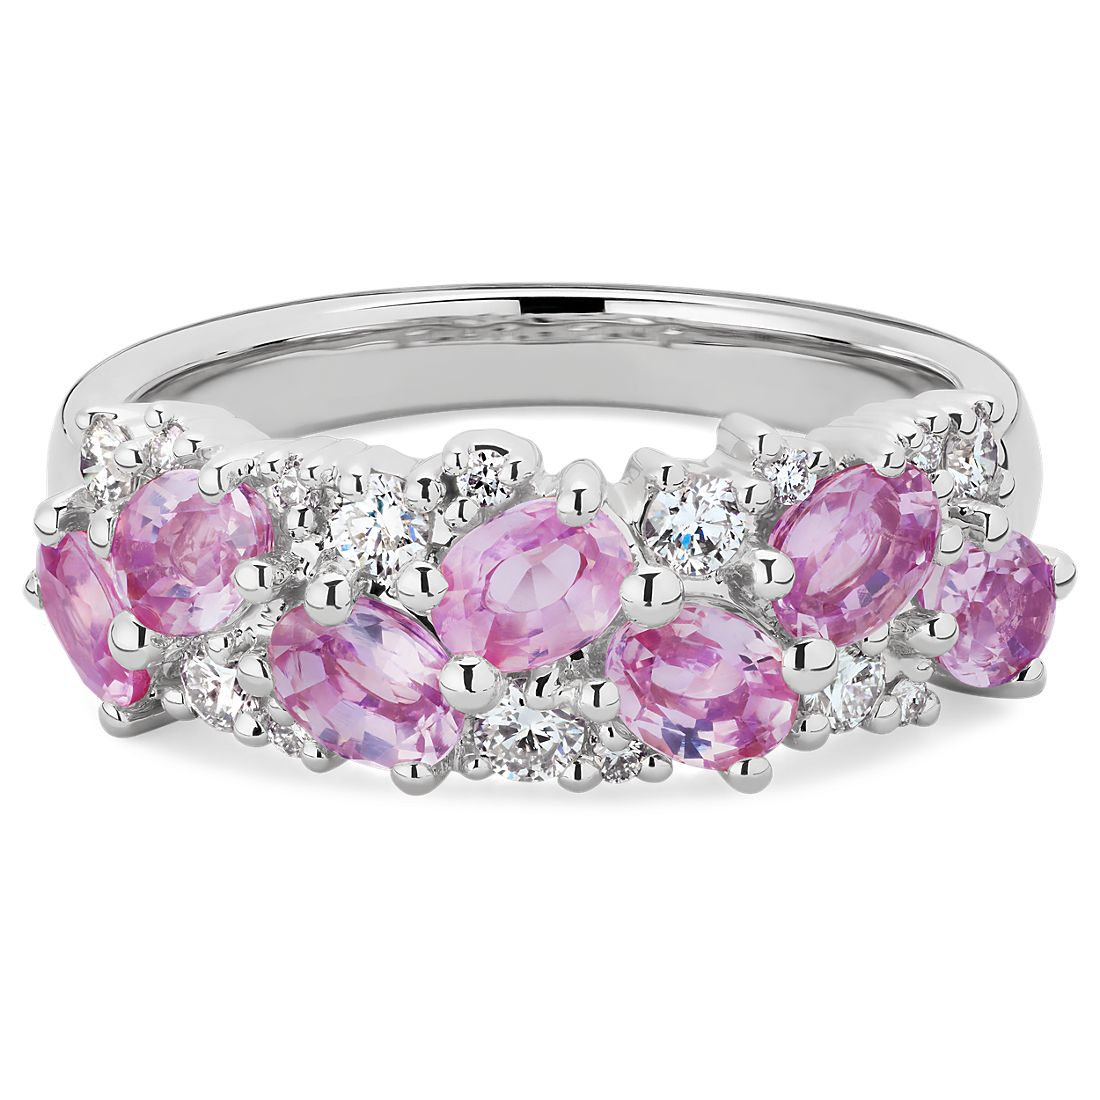 Romantic Oval Pink Sapphire and Diamond Ring in 14k White Gold